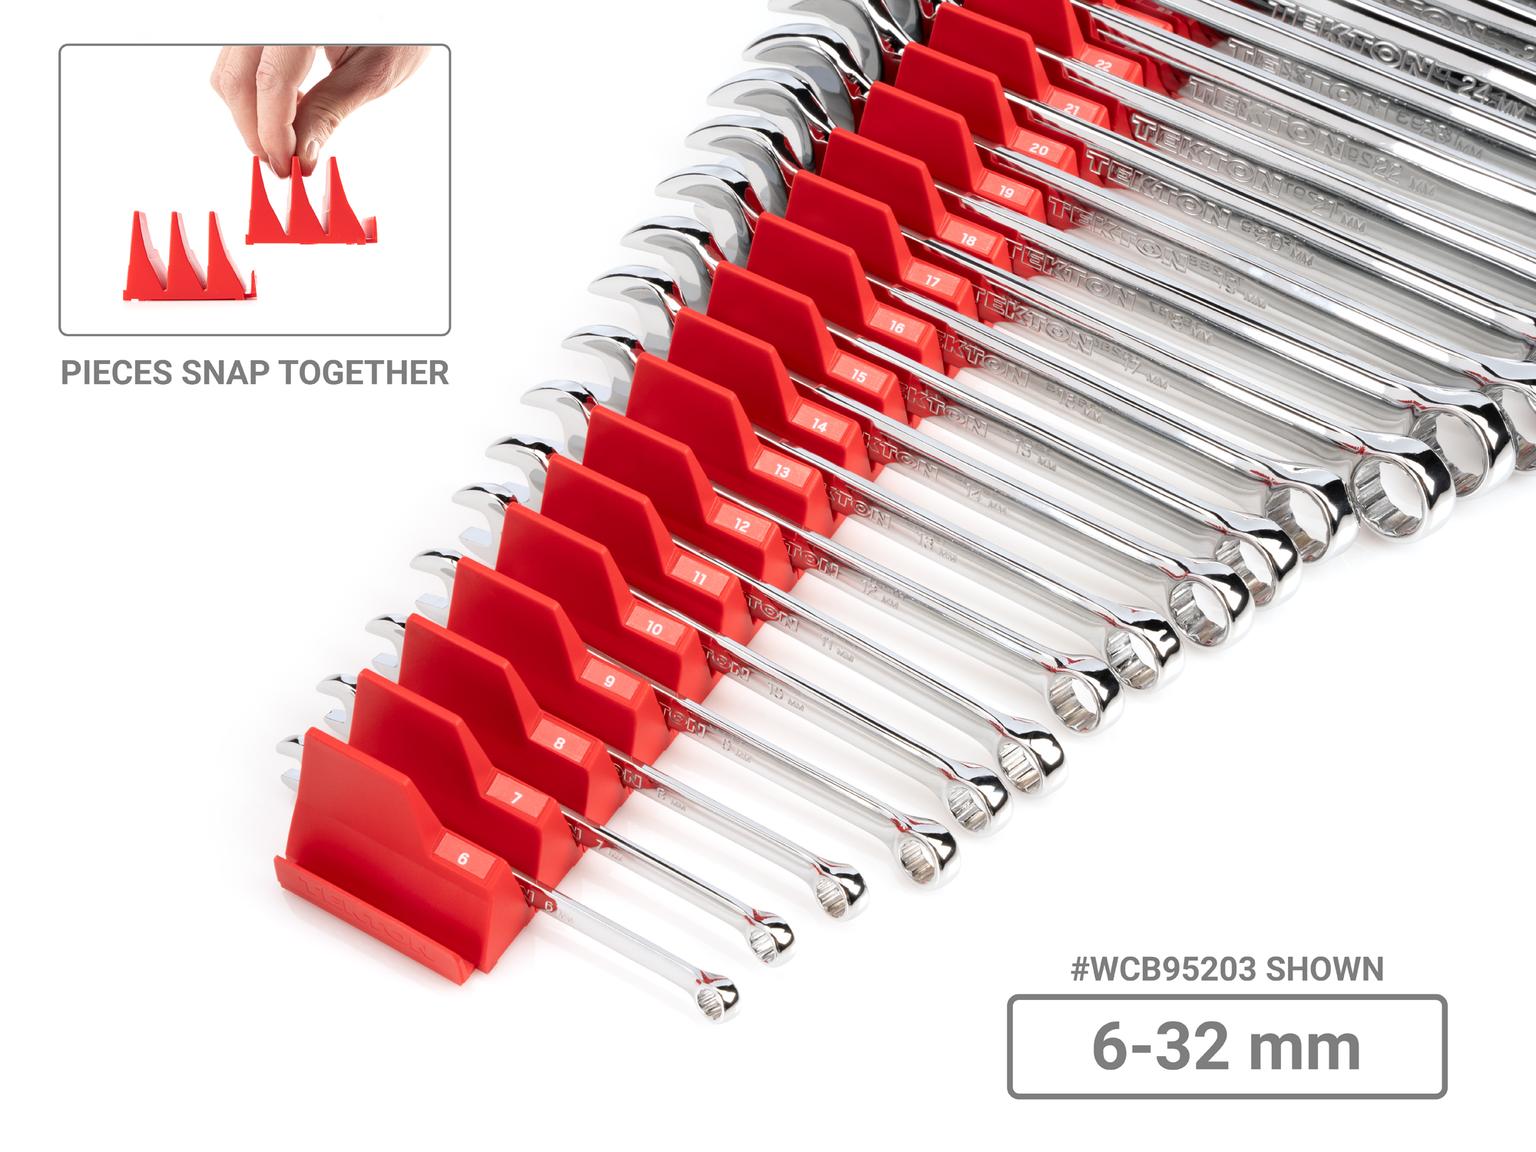 TEKTON WCB95303-T Combination Wrench Set with Modular Slotted Organizer, 46-Piece (1/4 - 1-1/4 in., 6 - 32 mm)